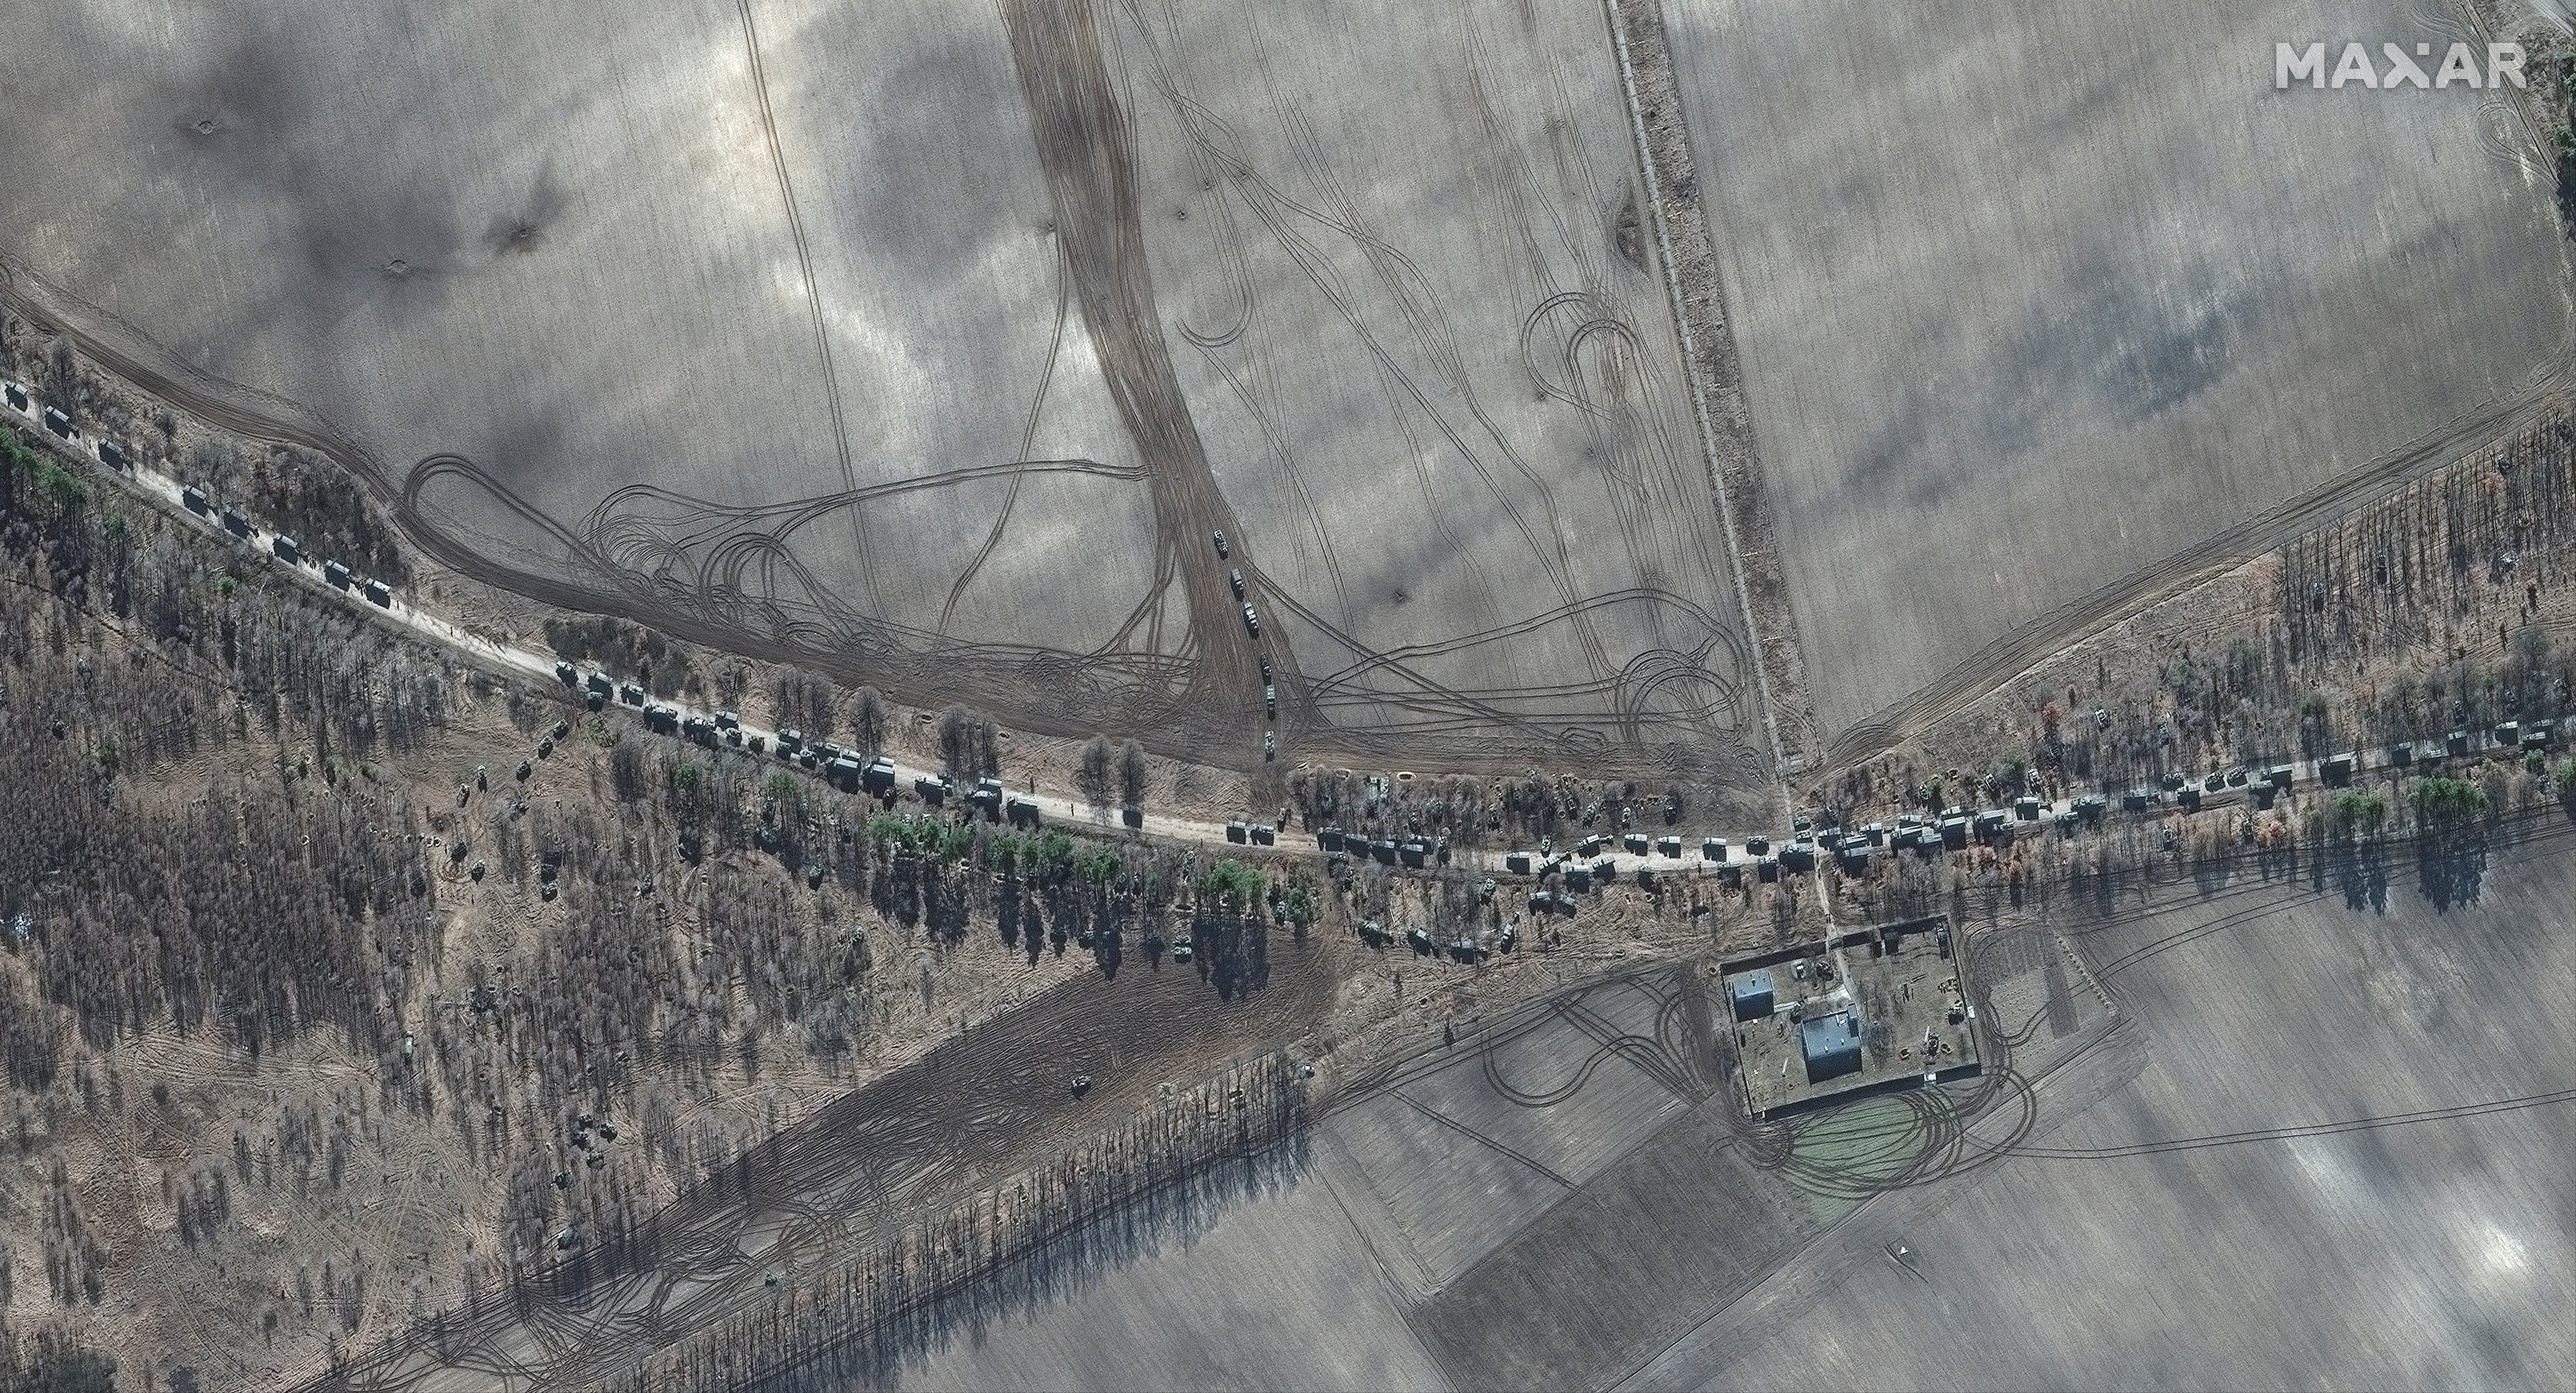 The southern end of a convoy of armour towed artillery trucks, east of Antonov airport, on Kyiv outskirts